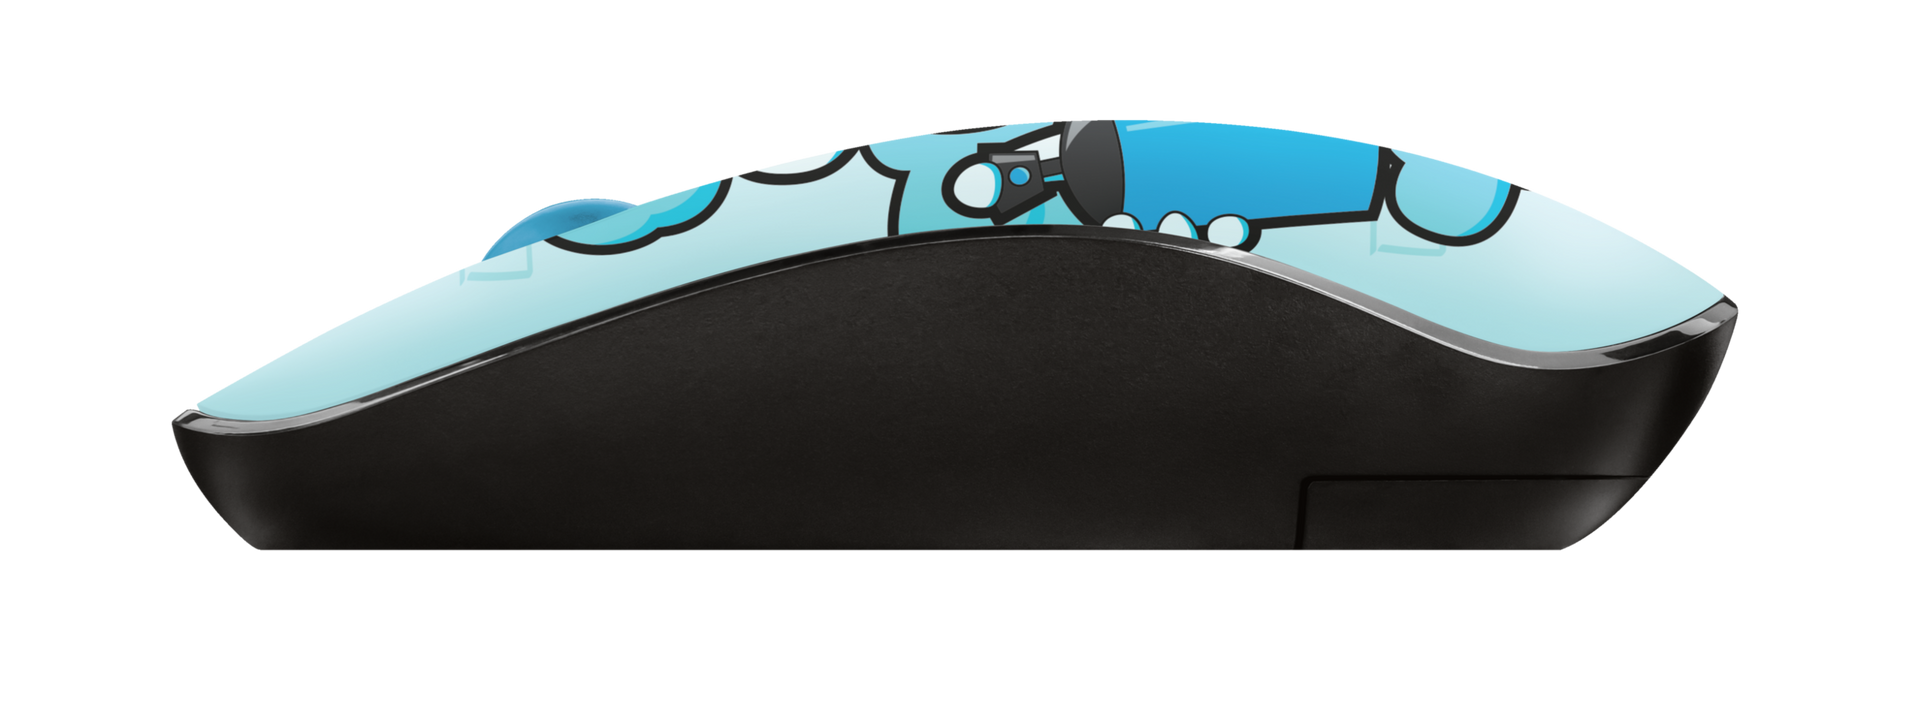 Sketch Silent Click Wireless Mouse - cyan blue-Side